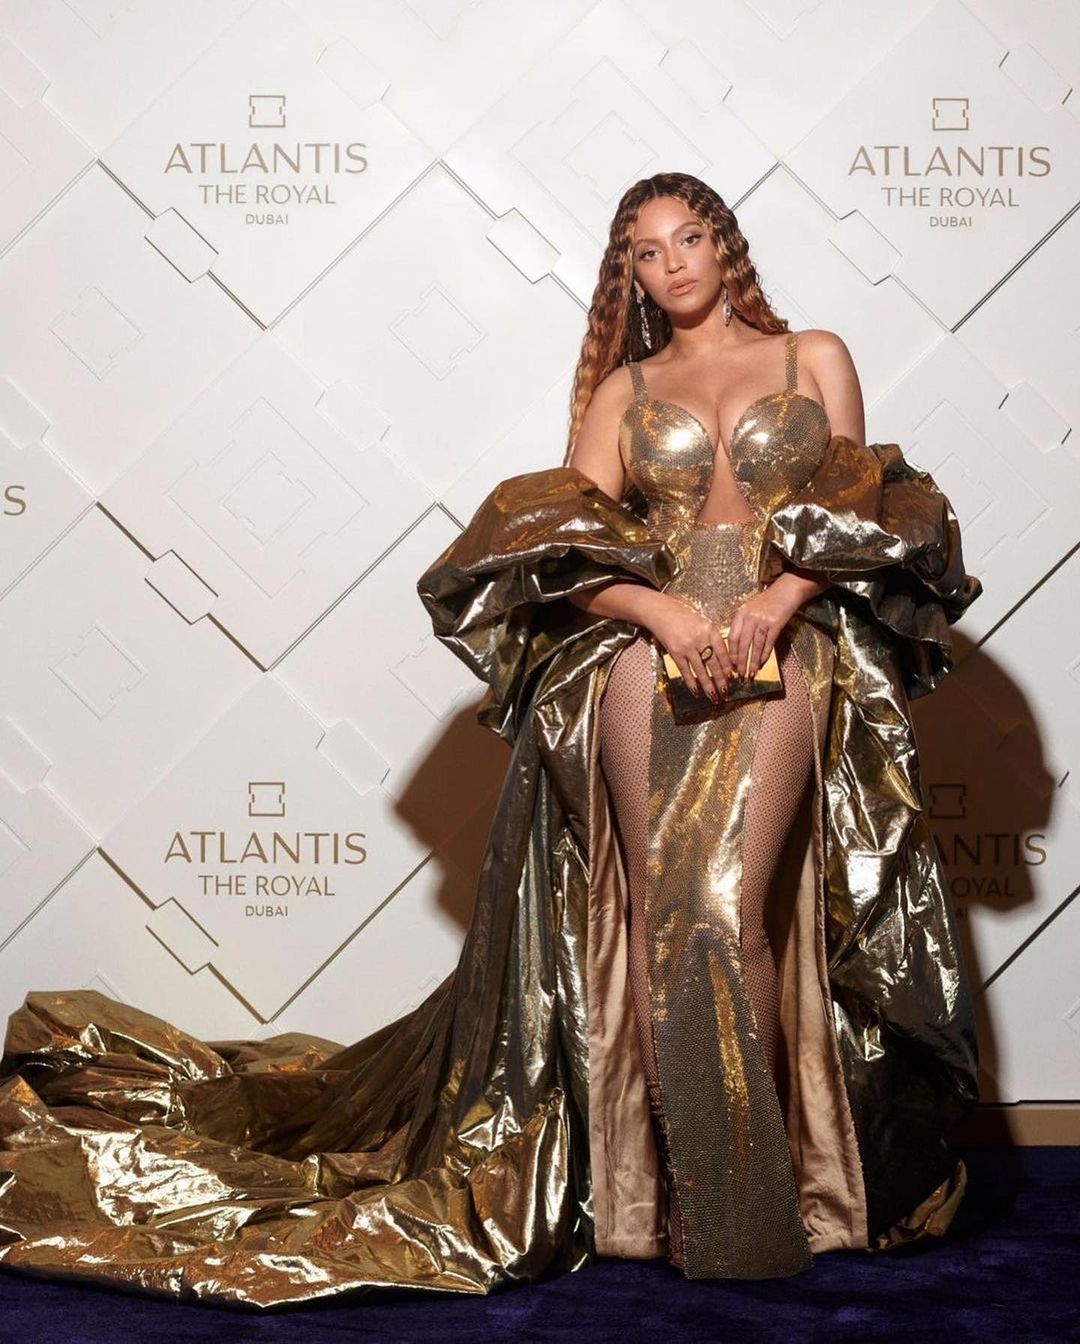 Beyoncé Wore 4 Colorful Looks During Her Private Performance at Dubai’s Atlantis The Royal: Including a Gold Dolce & Gabbana, a Yellow Atelier Zuhra, a Red Nicolas Jebran and More